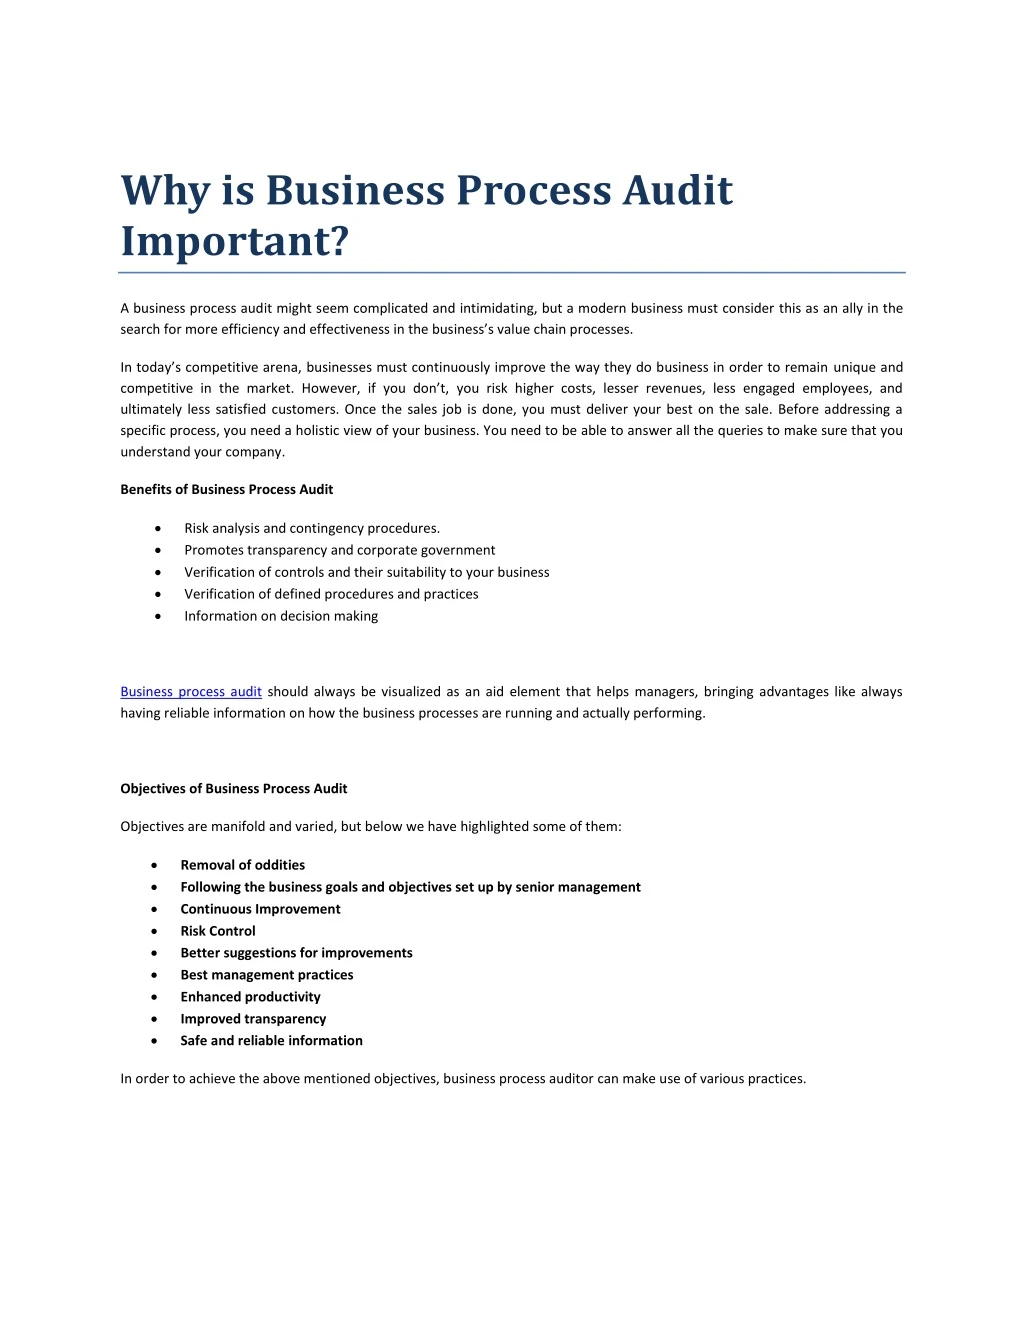 why is business process audit important